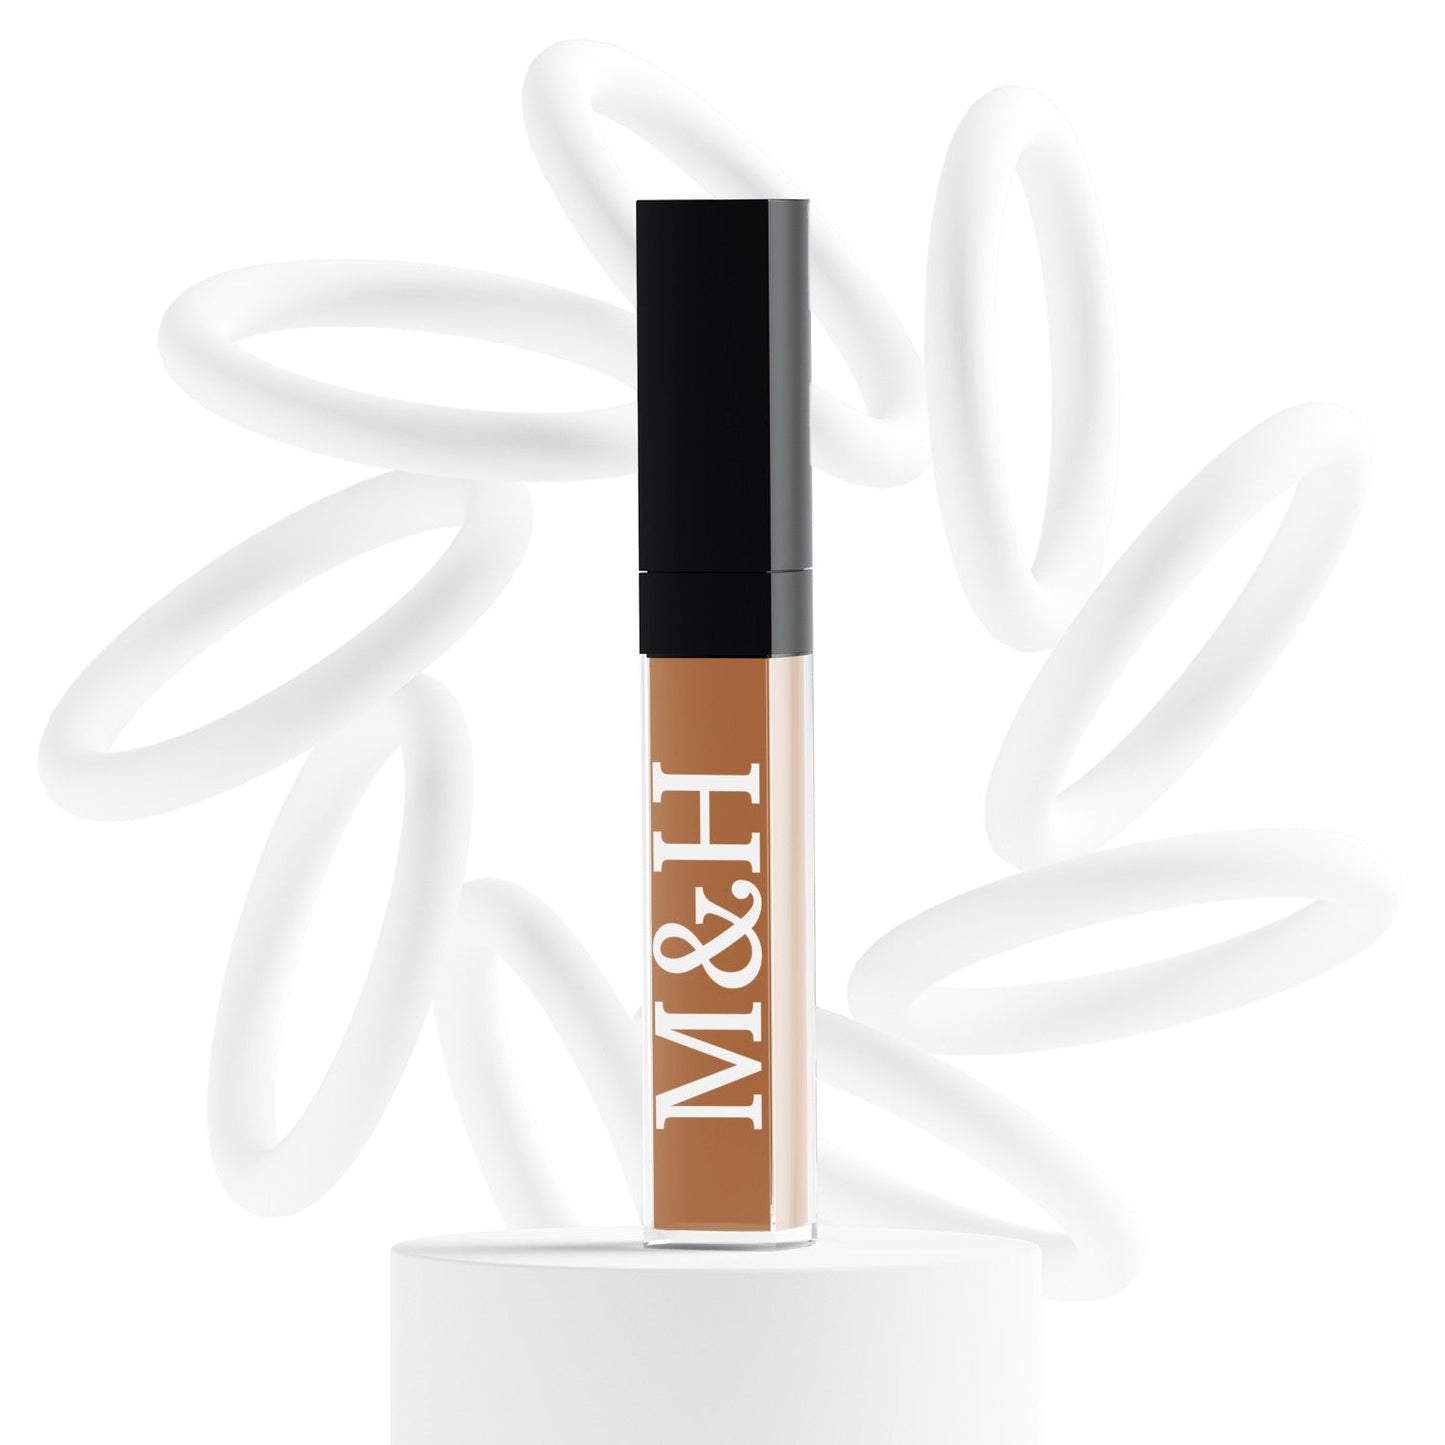 Vegan Concealers - M&H FashionVegan ConcealersconcealerM&H FashionM&H FashionConcealer-908Coffee BeanVegan ConcealersM&H FashionconcealerM&H Fashion This multifunctional concealer is designed to cover under-eye circles, complexion alterations, and major imperfections like scars, hyperpigmentation, burns, and tatVegan Concealers